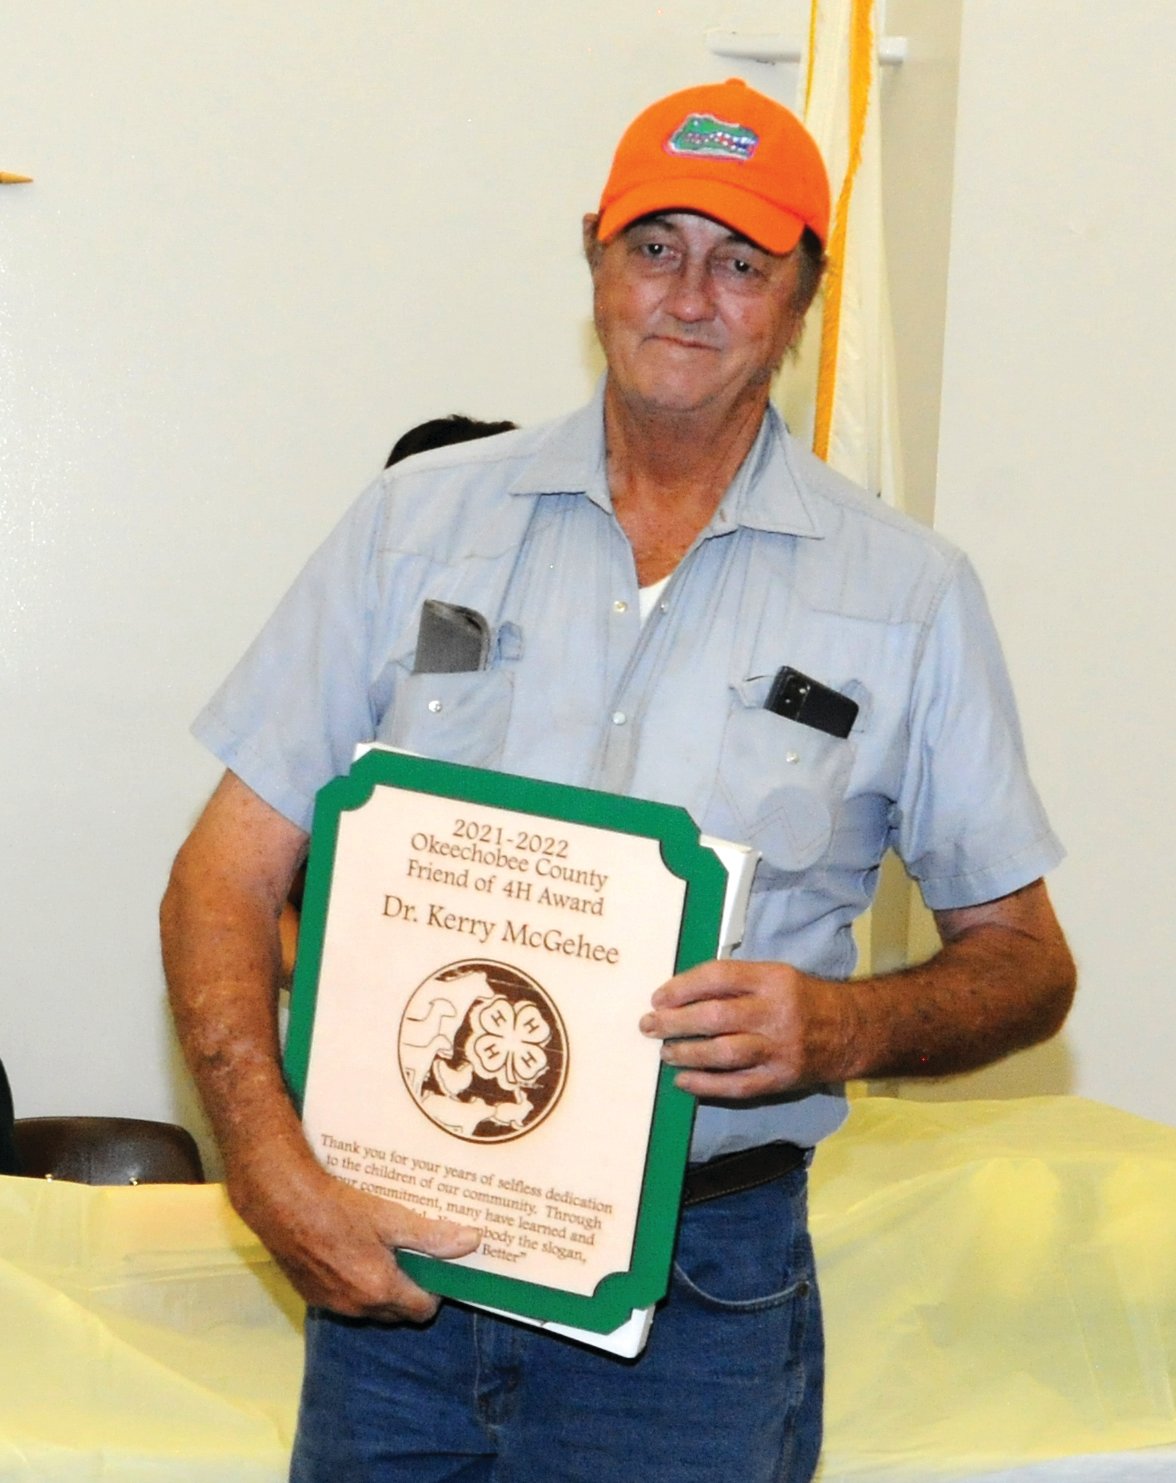 OKEECHOBEE -- Dr. Kerry McGehee was honored with the 2021-2022 Friend of 4-H Award during the annual banquet, held Oct. 9 at the Scott Driver Recreation Area. [Photo by Katrina Elsken/Lake Okeechobee News]